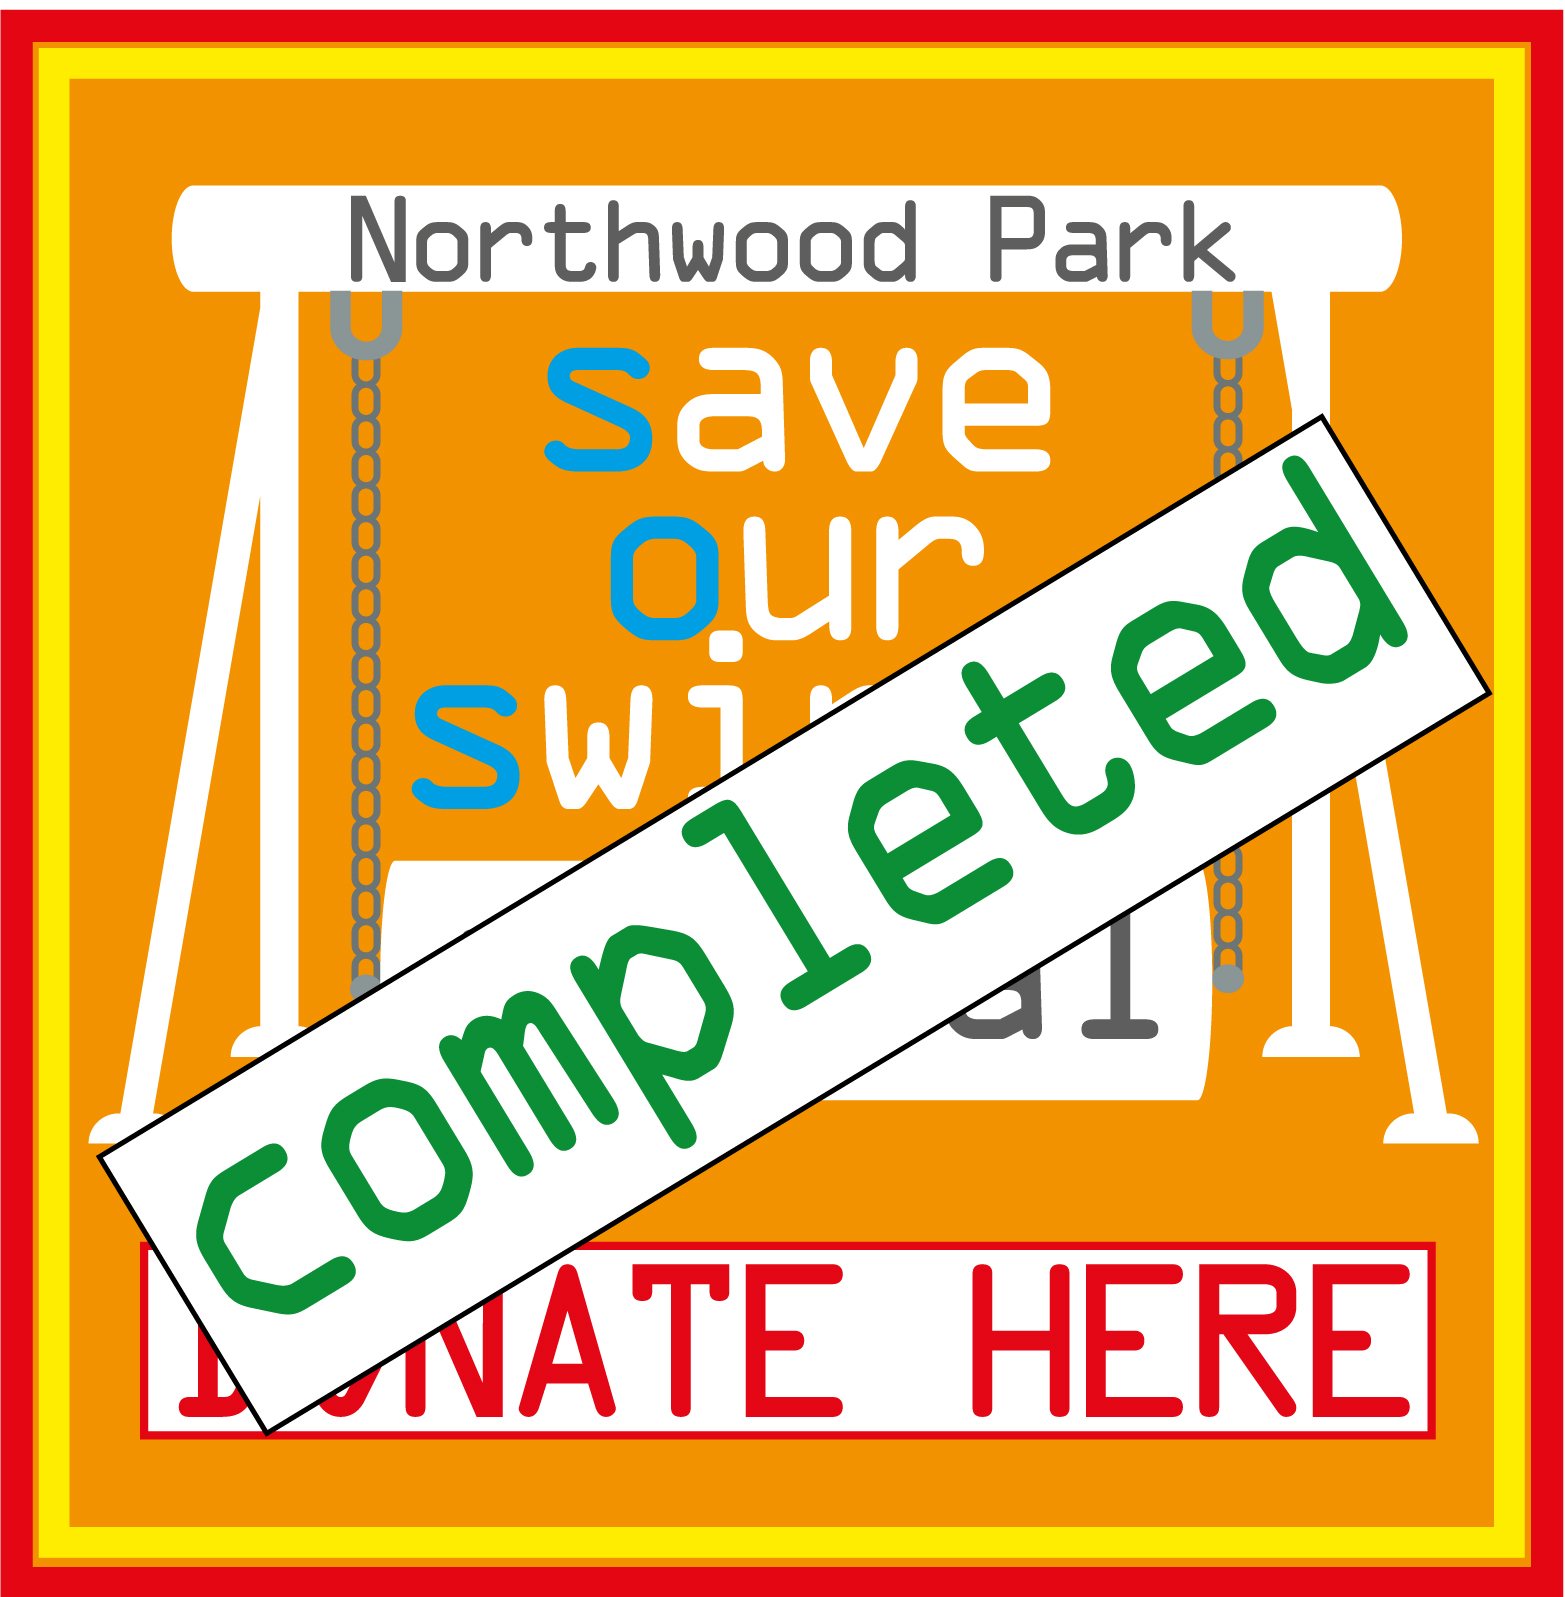 Save Our Swings Appeal-Funding Completed!